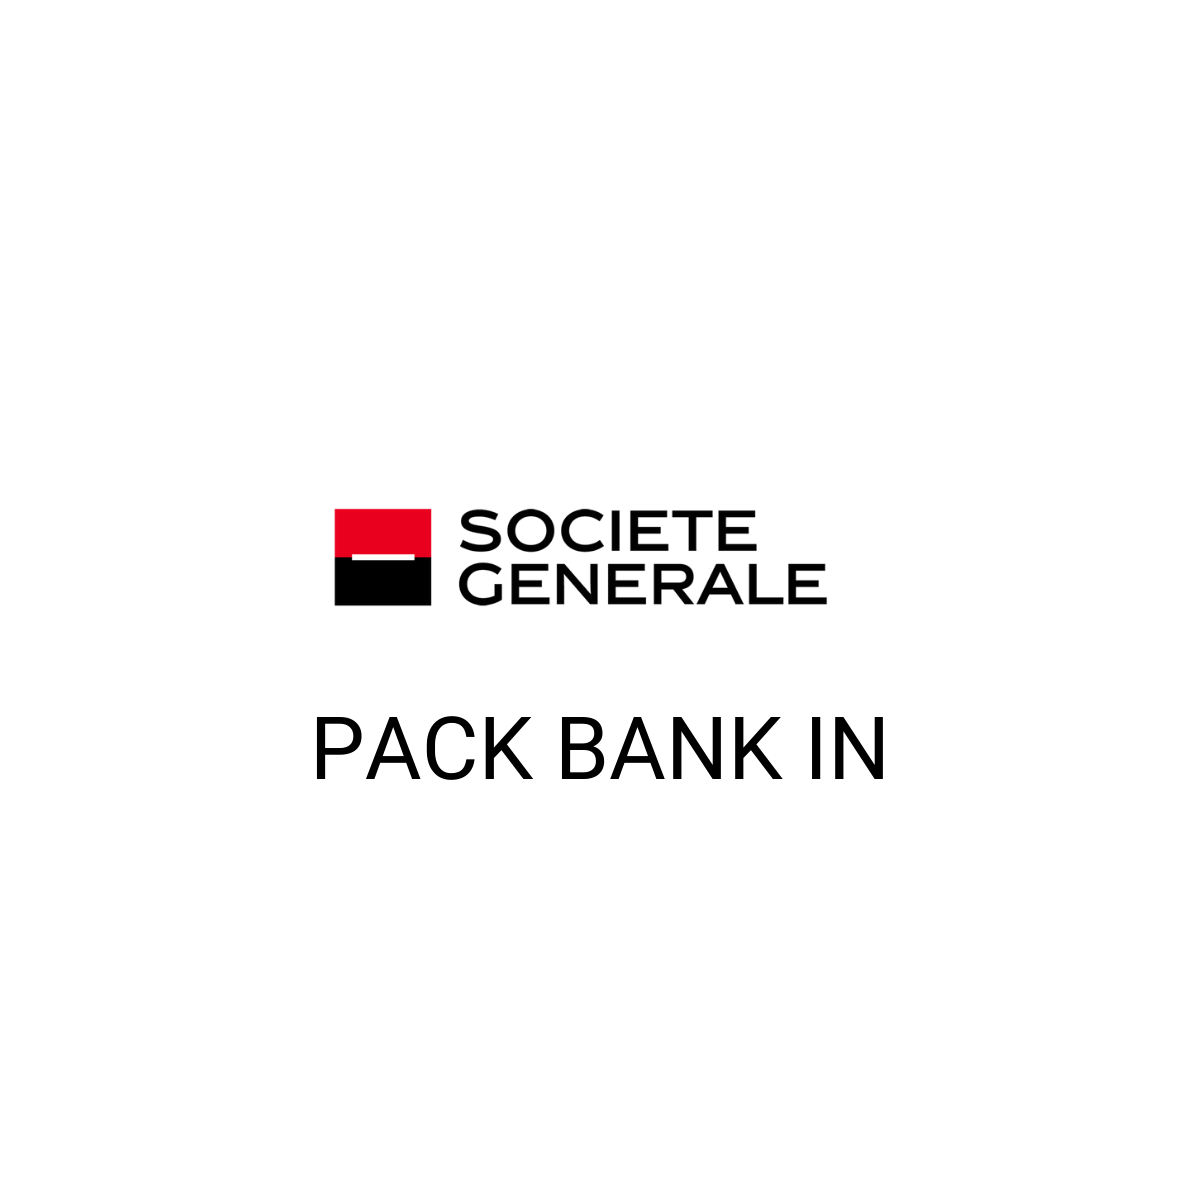 PACK BANK IN